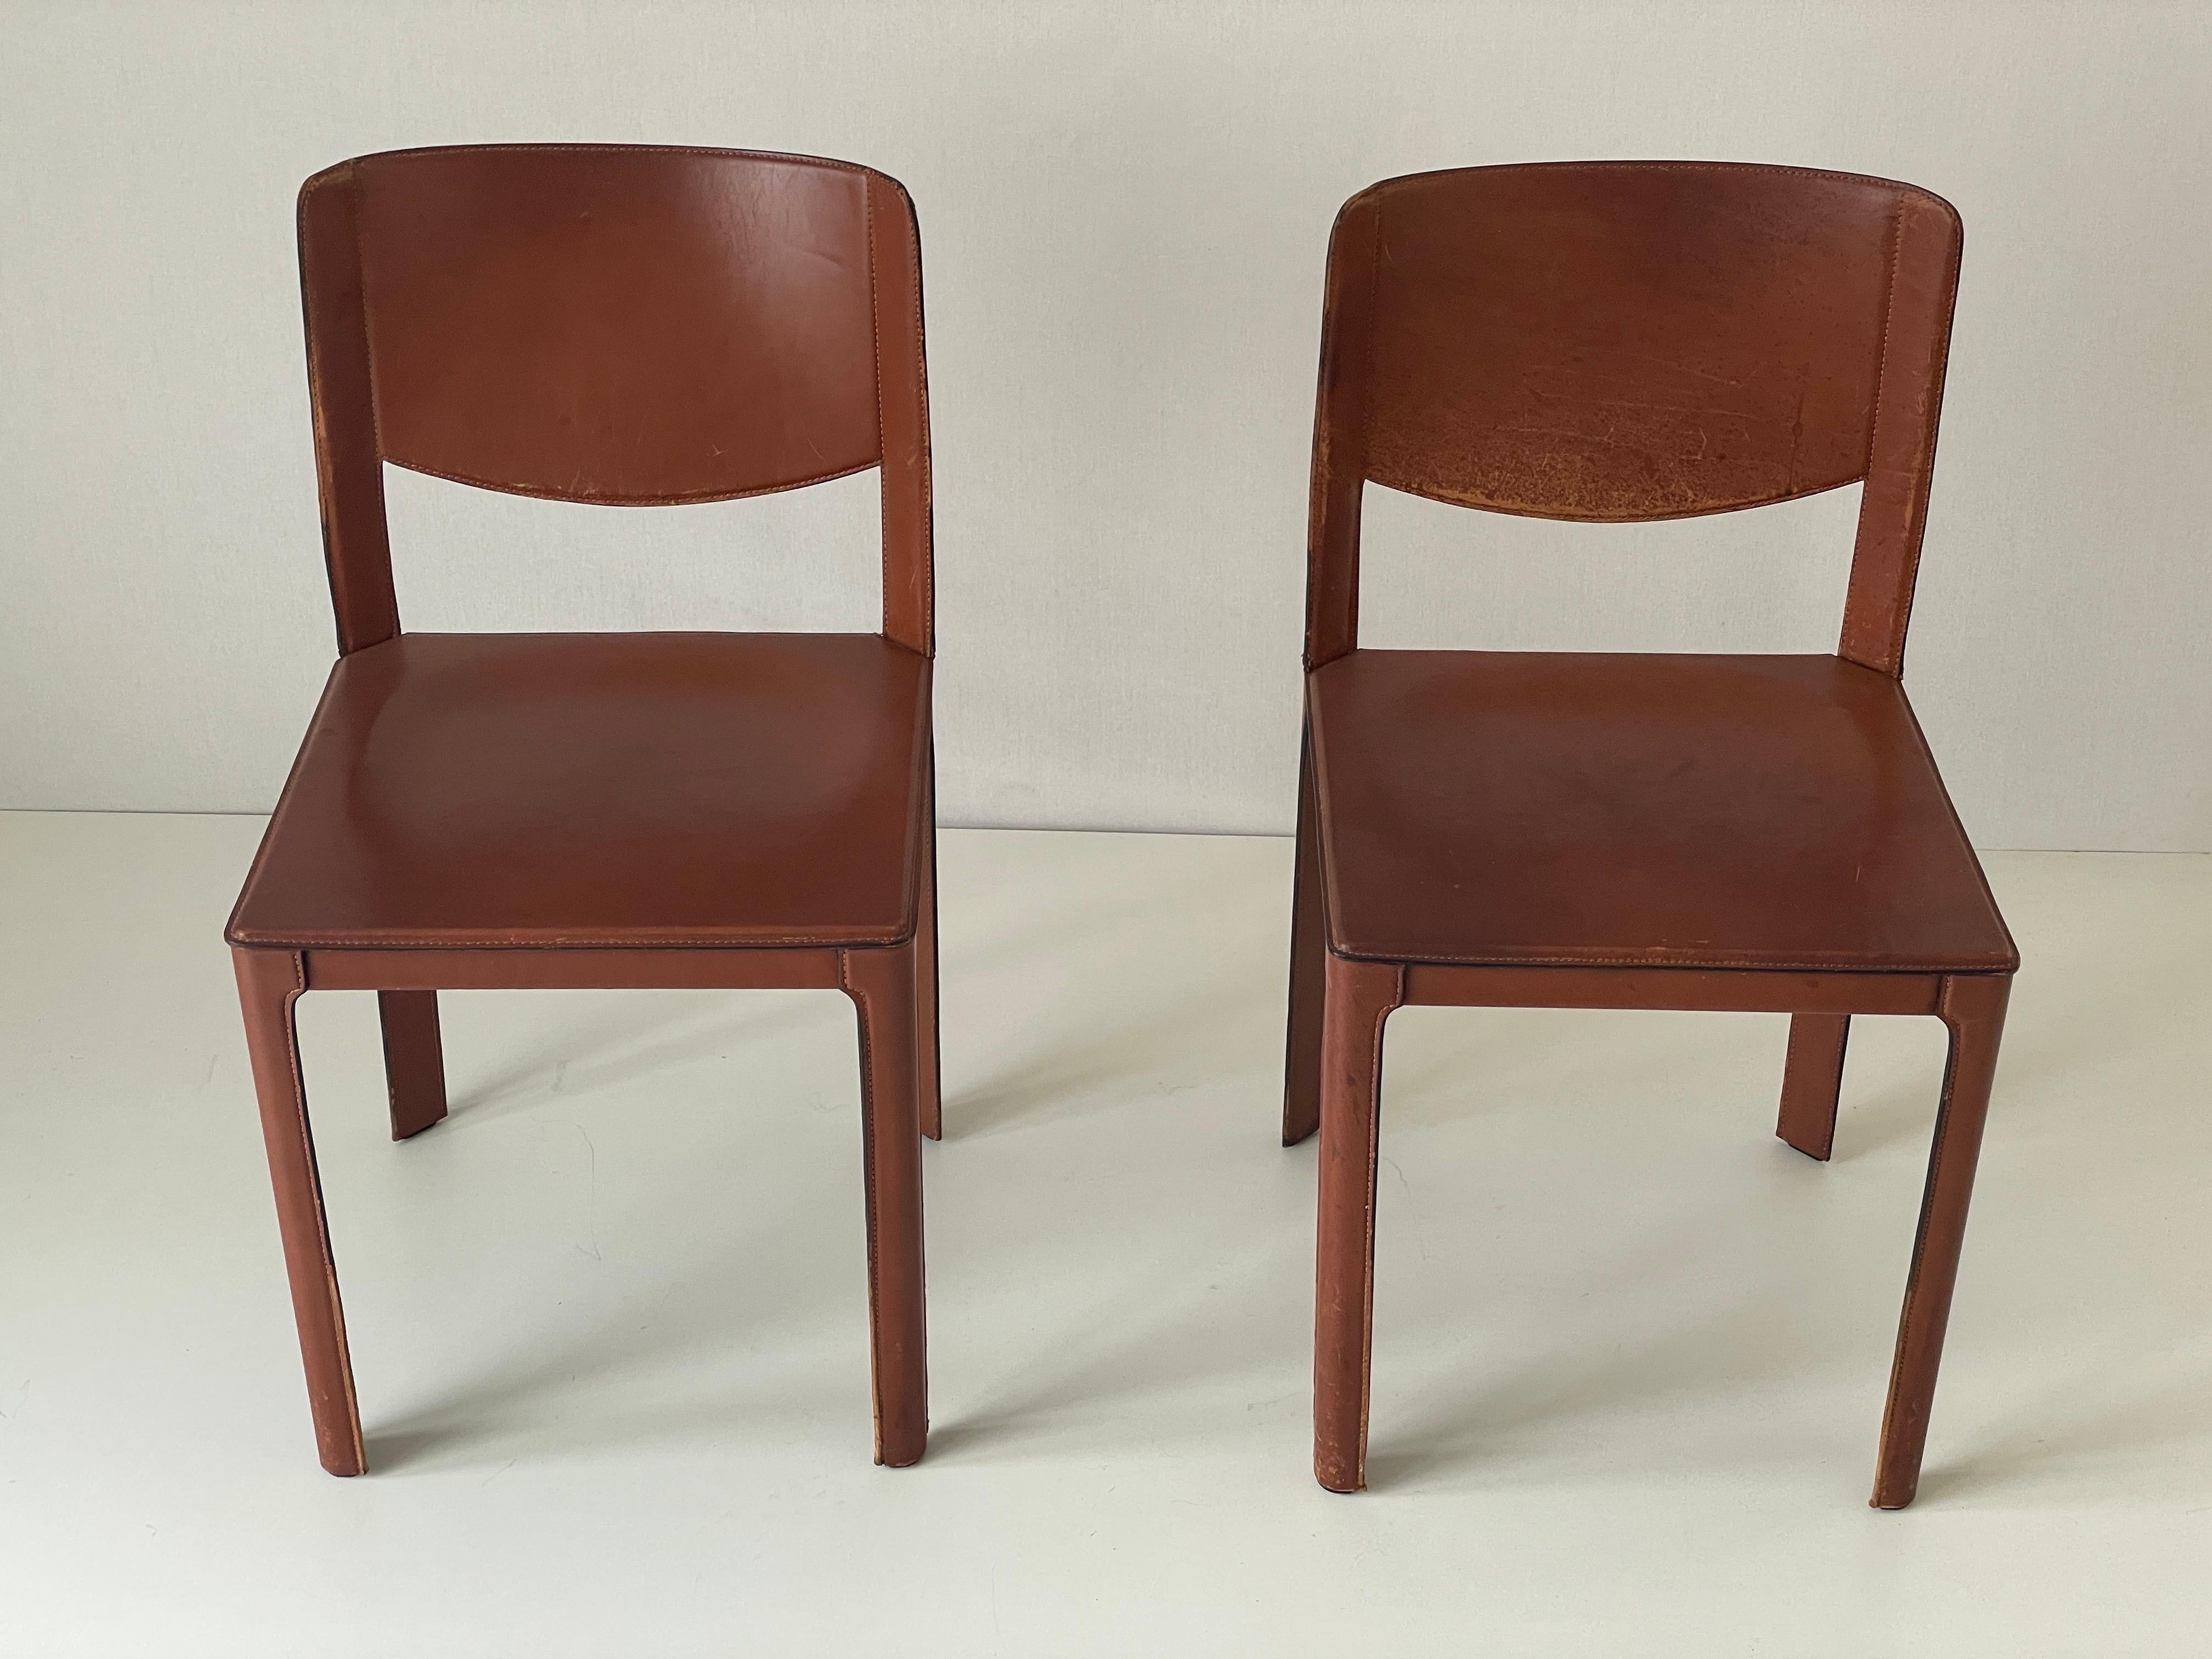 Pair of Italian Brown Leather Chairs by Matteo Grassi, 1970s, Italy

Measurements :

Height: 80 cm
Seating height: 45 cm
Seating: 44 cm x 44 cm

Please do not hesitate to ask us if you have any questions.